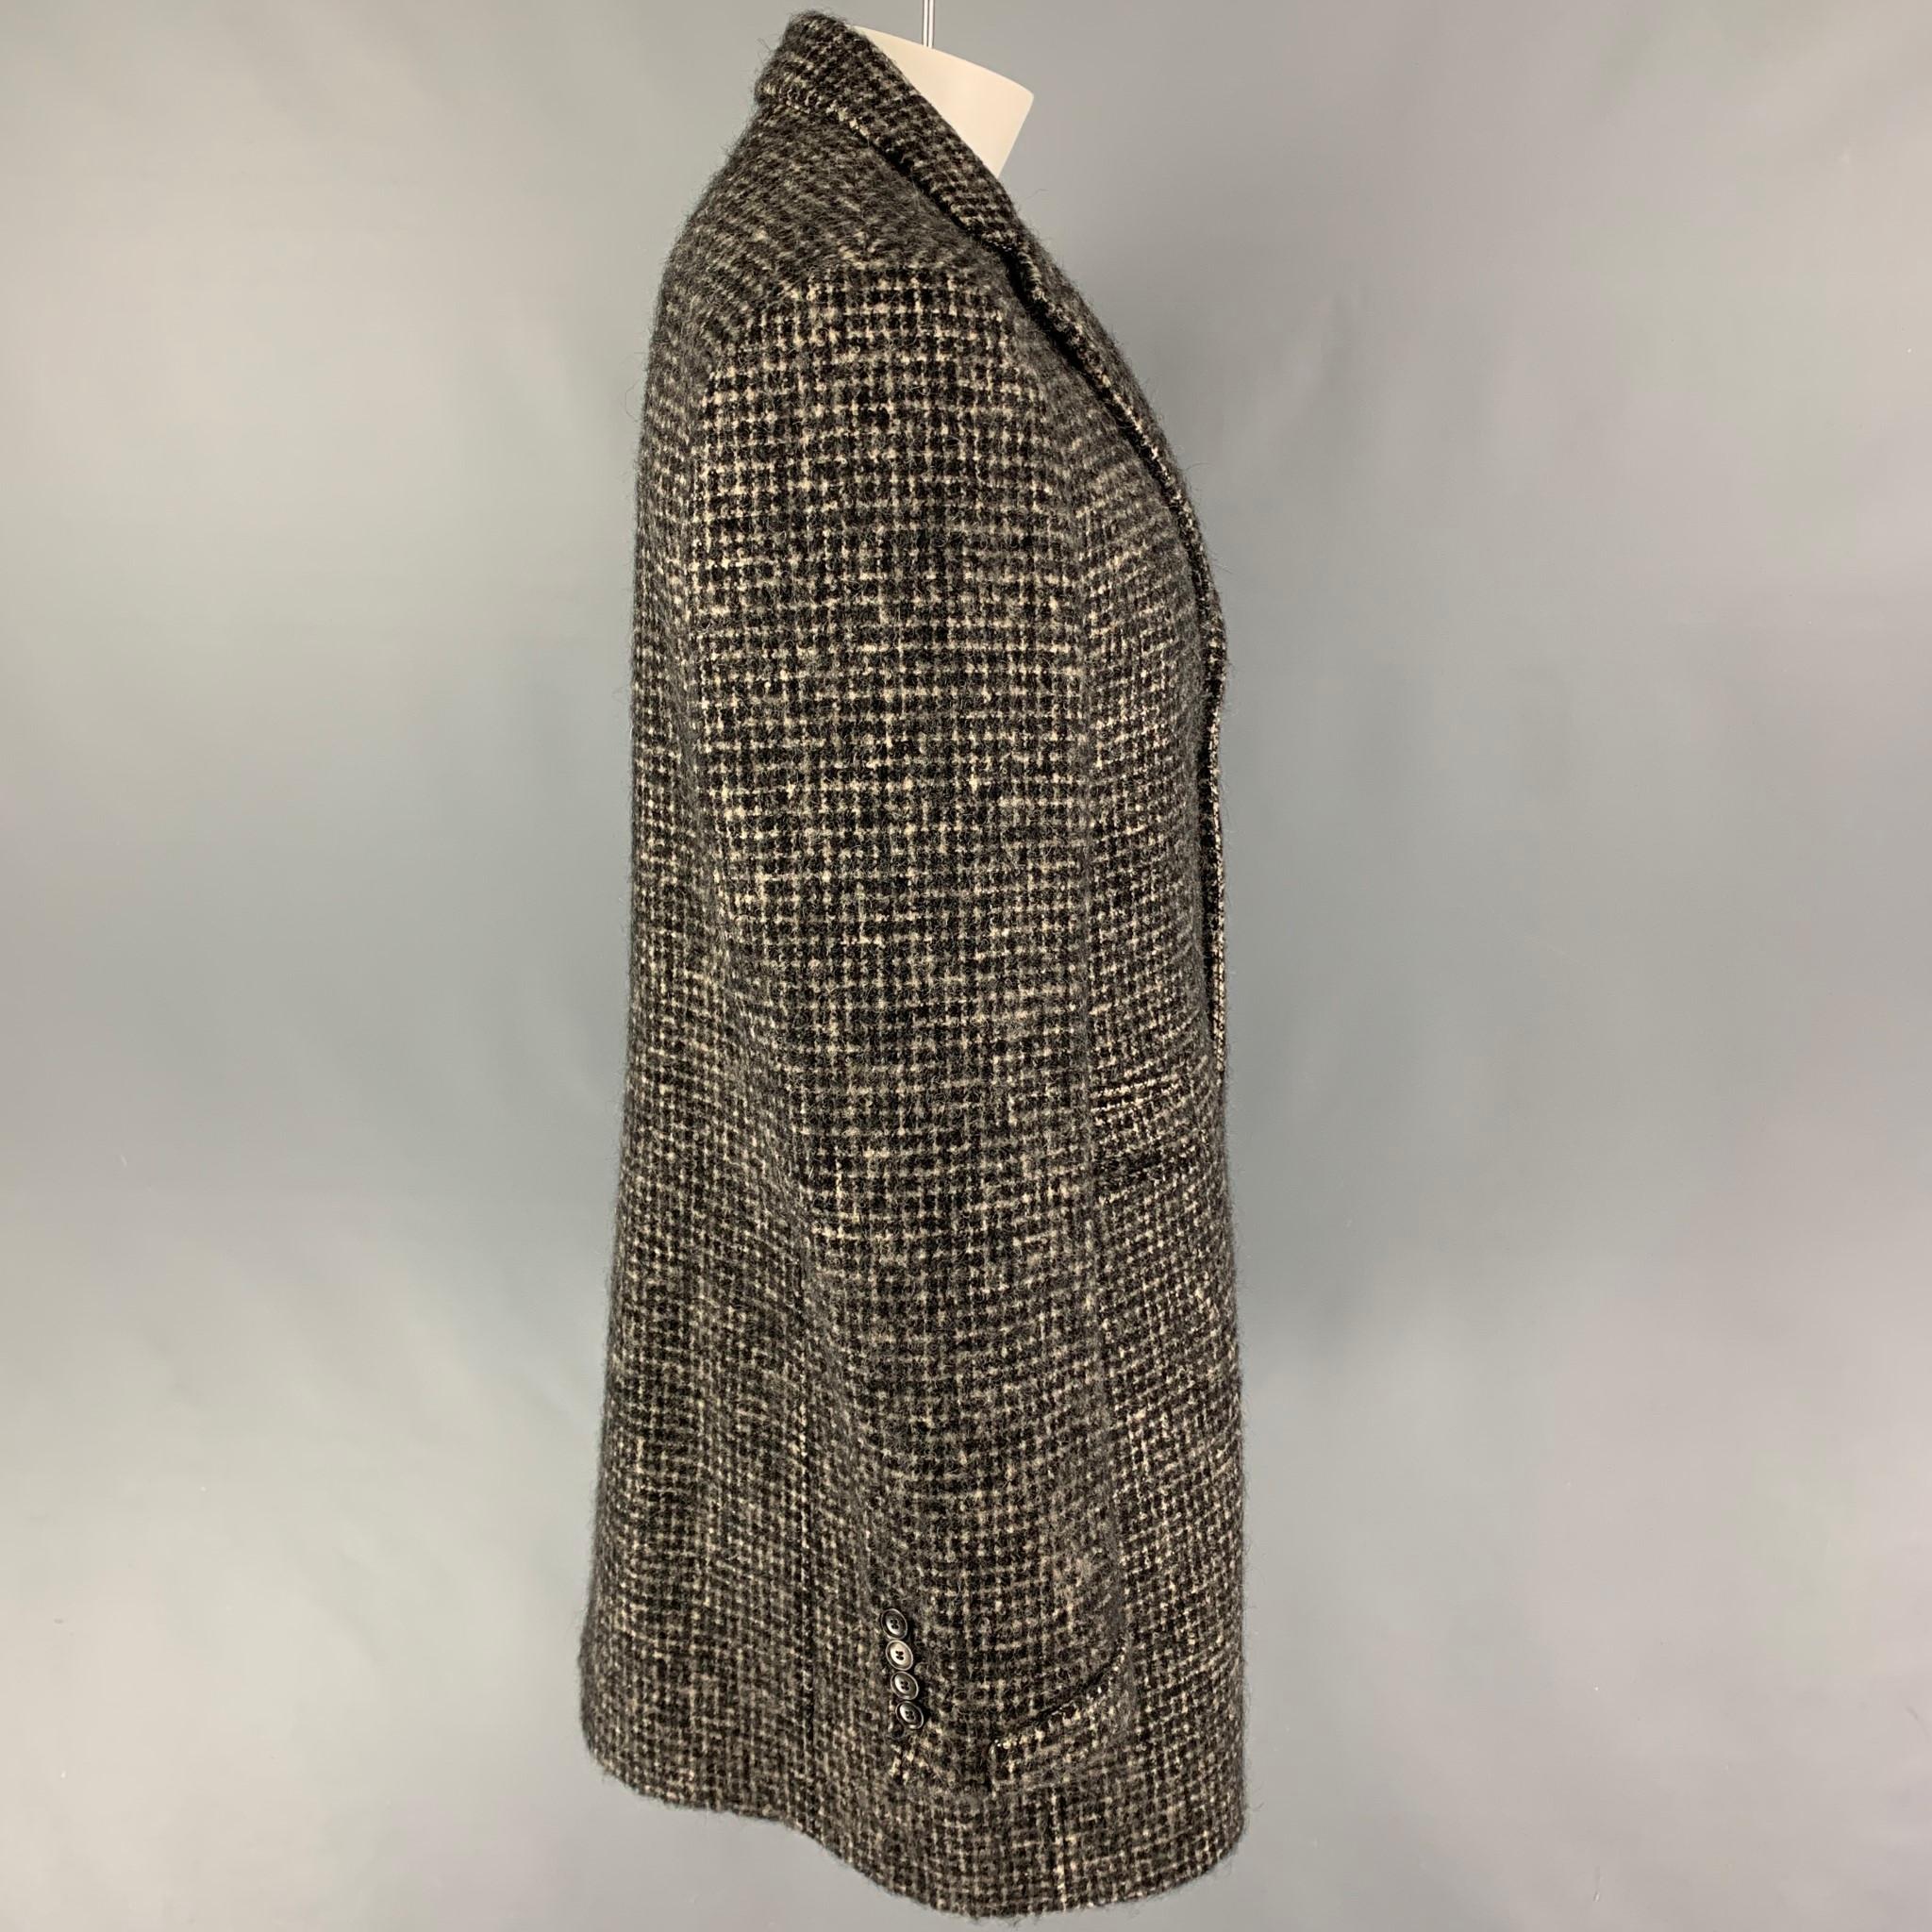 JOHN VARVATOS 'Limited Edition' coat comes in a black & cream checkered wool blend with a full liner featuring a notch lapel, slit pockets, single back vent, and a buttoned closure. Made in Italy. 

Very Good Pre-Owned Condition.
Marked: 52
Original